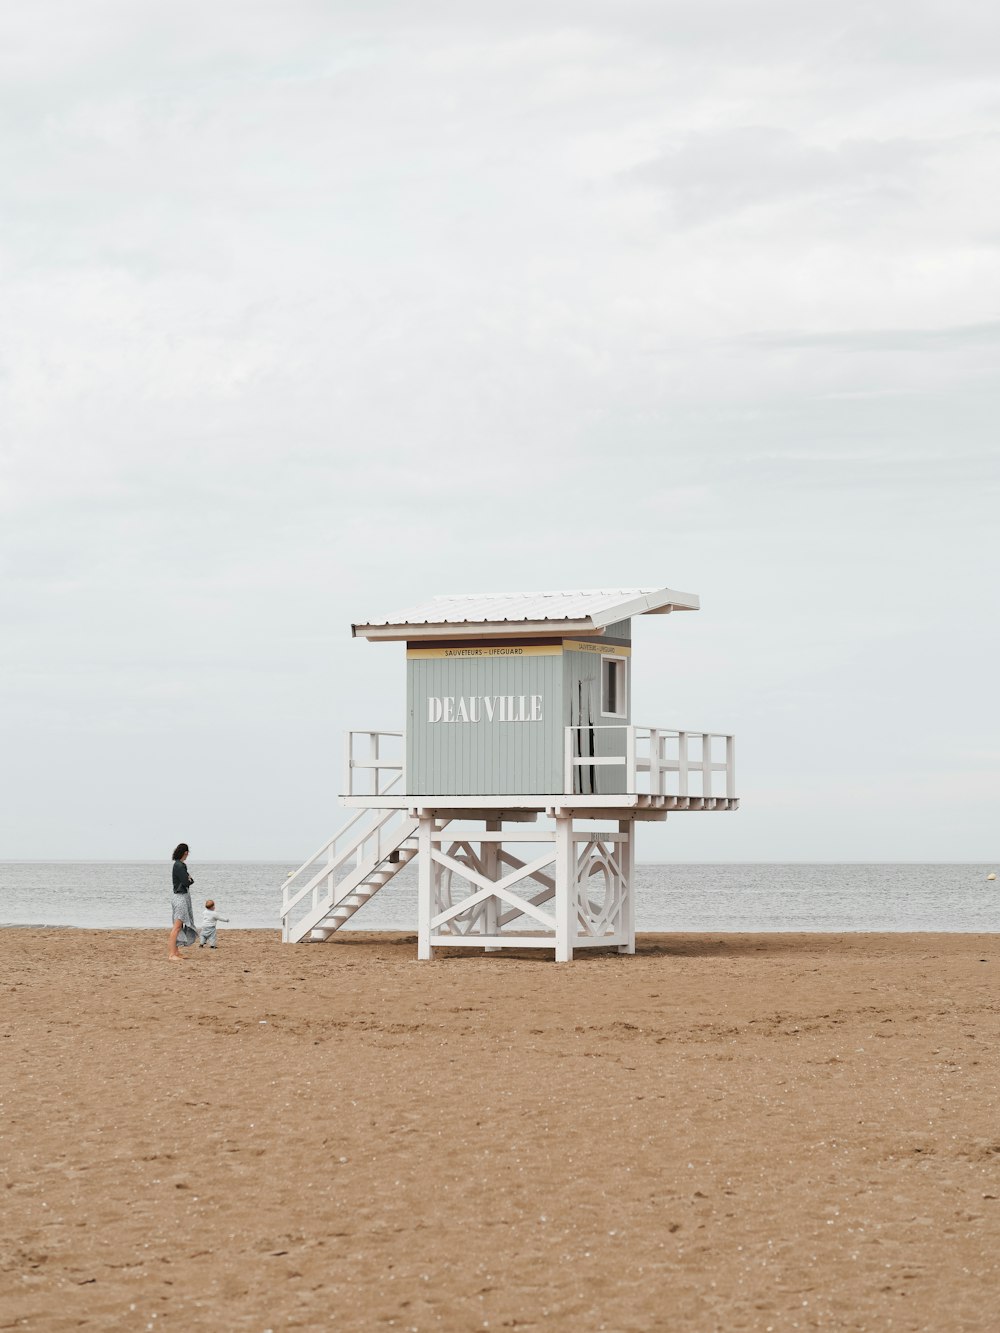 a lifeguard stand on the beach with a person walking towards it